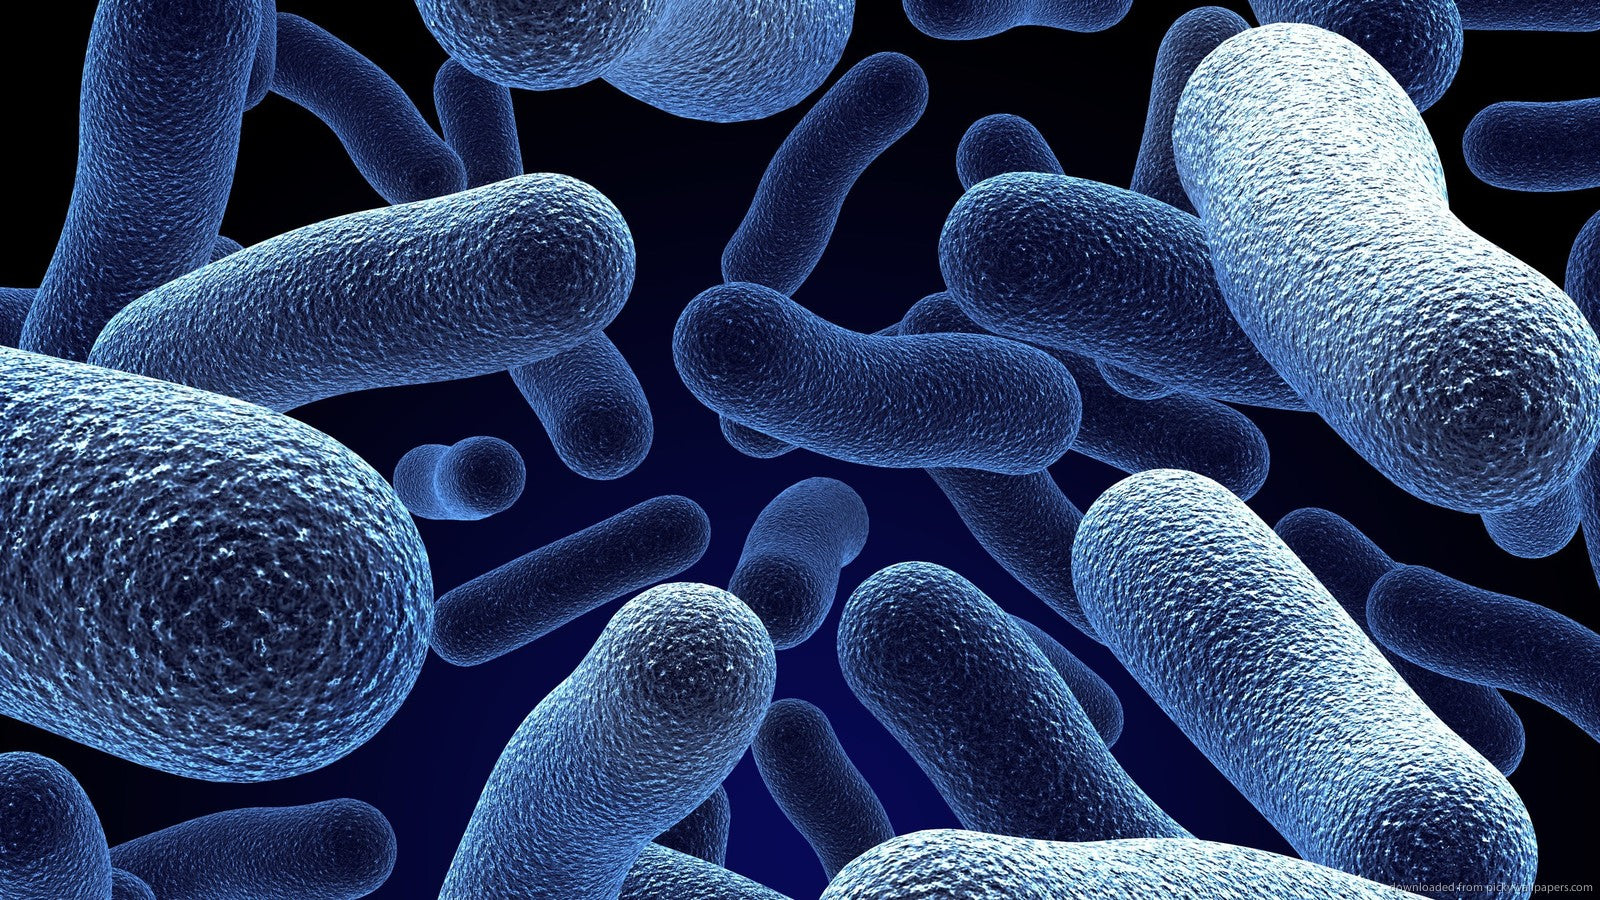 Yes, Probiotics Make You Poop. But It’s Complicated.